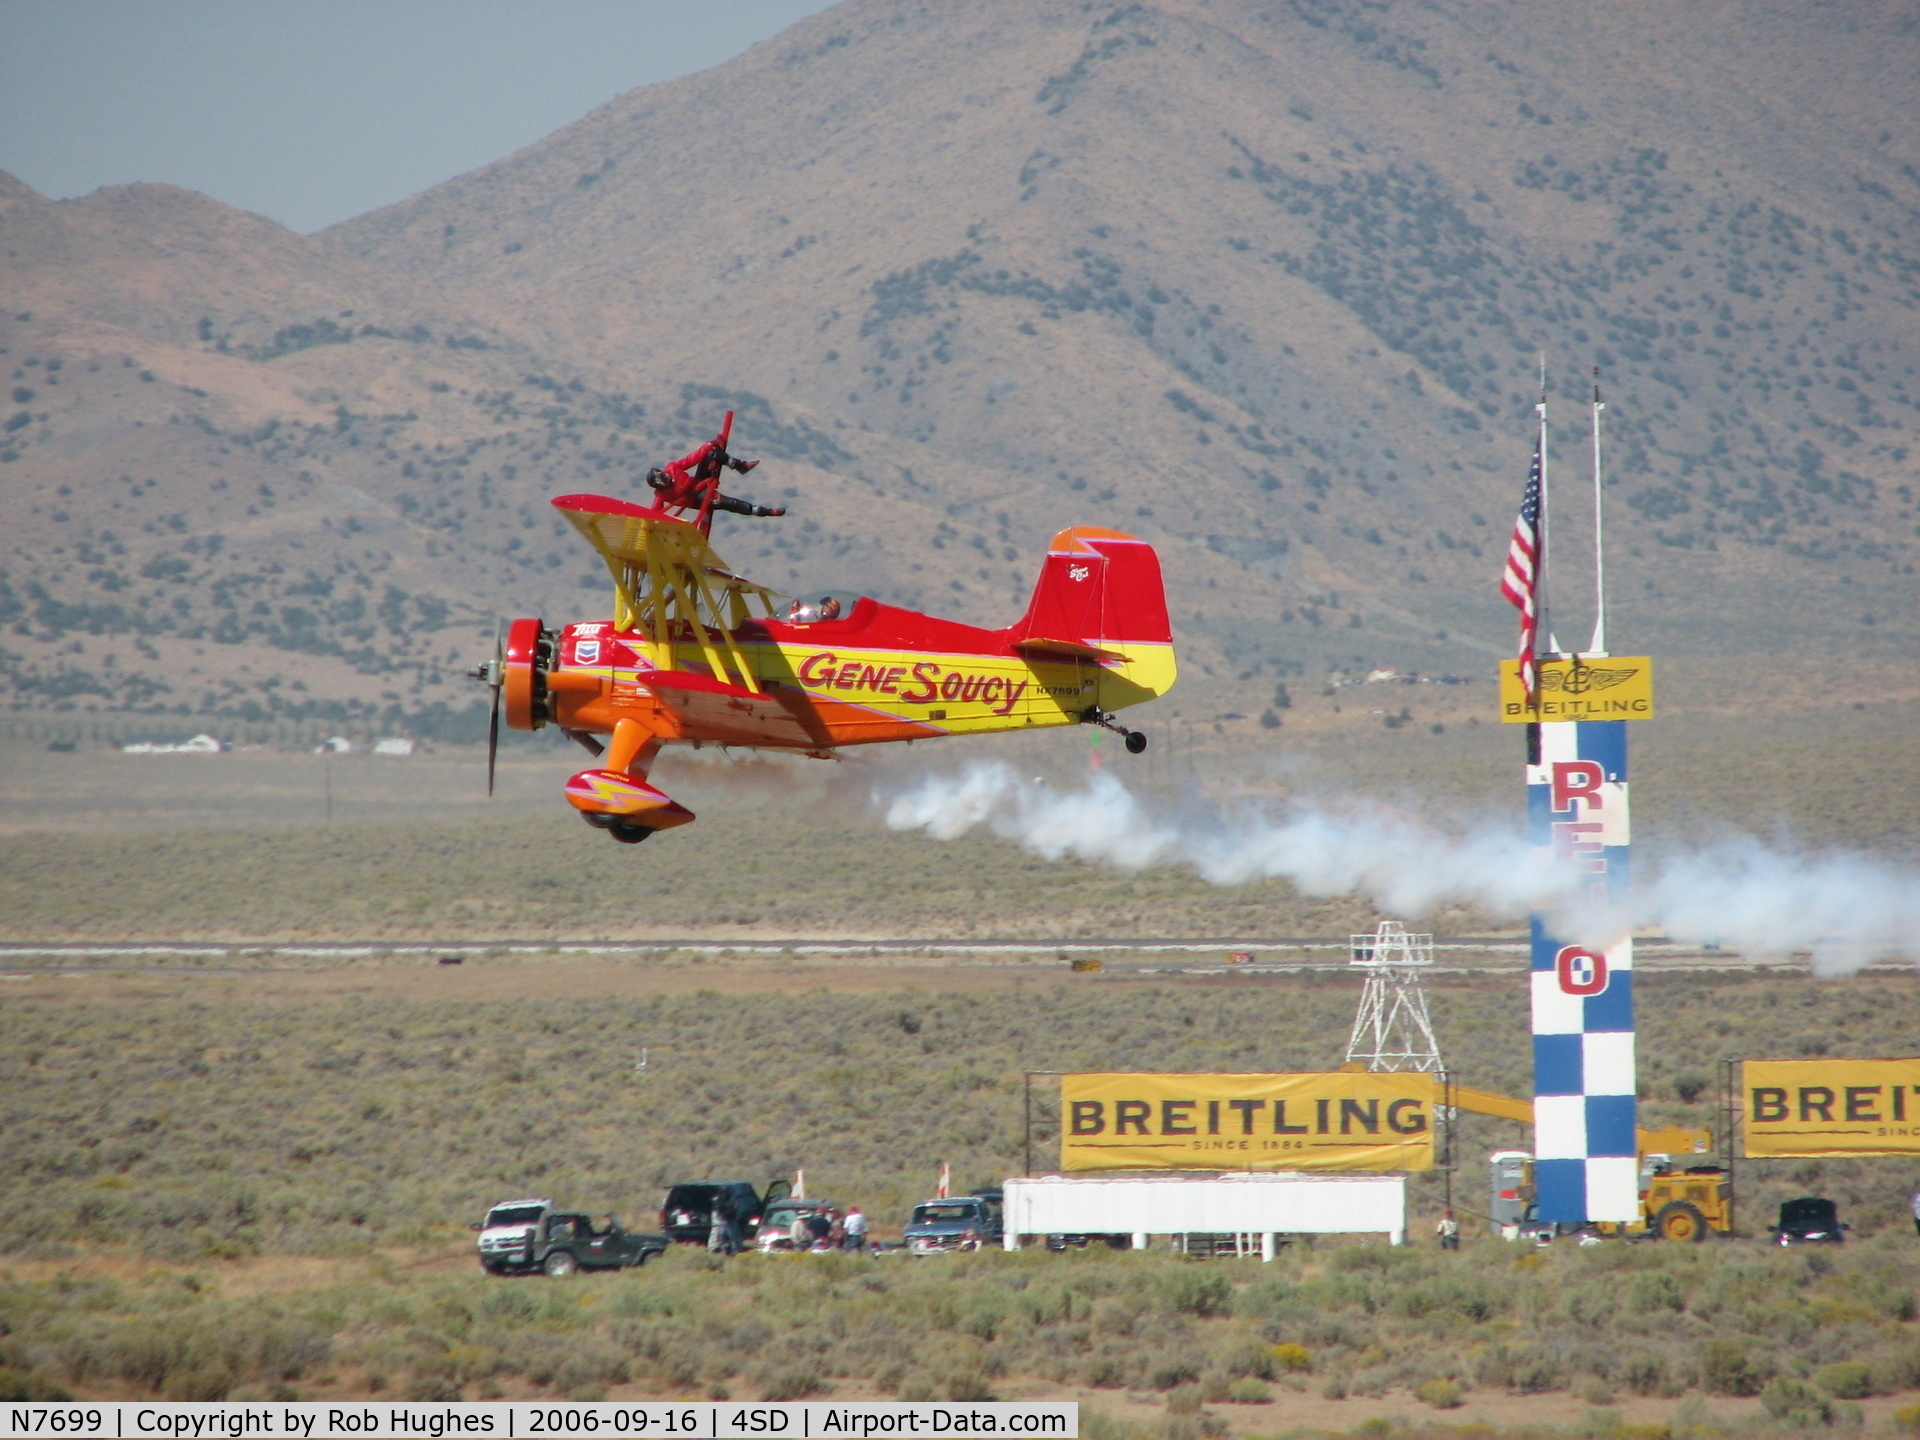 N7699, 1972 Grumman G-164A Show Cat C/N 1004, Gene Soucy and the 'Flying Lady' at Reno